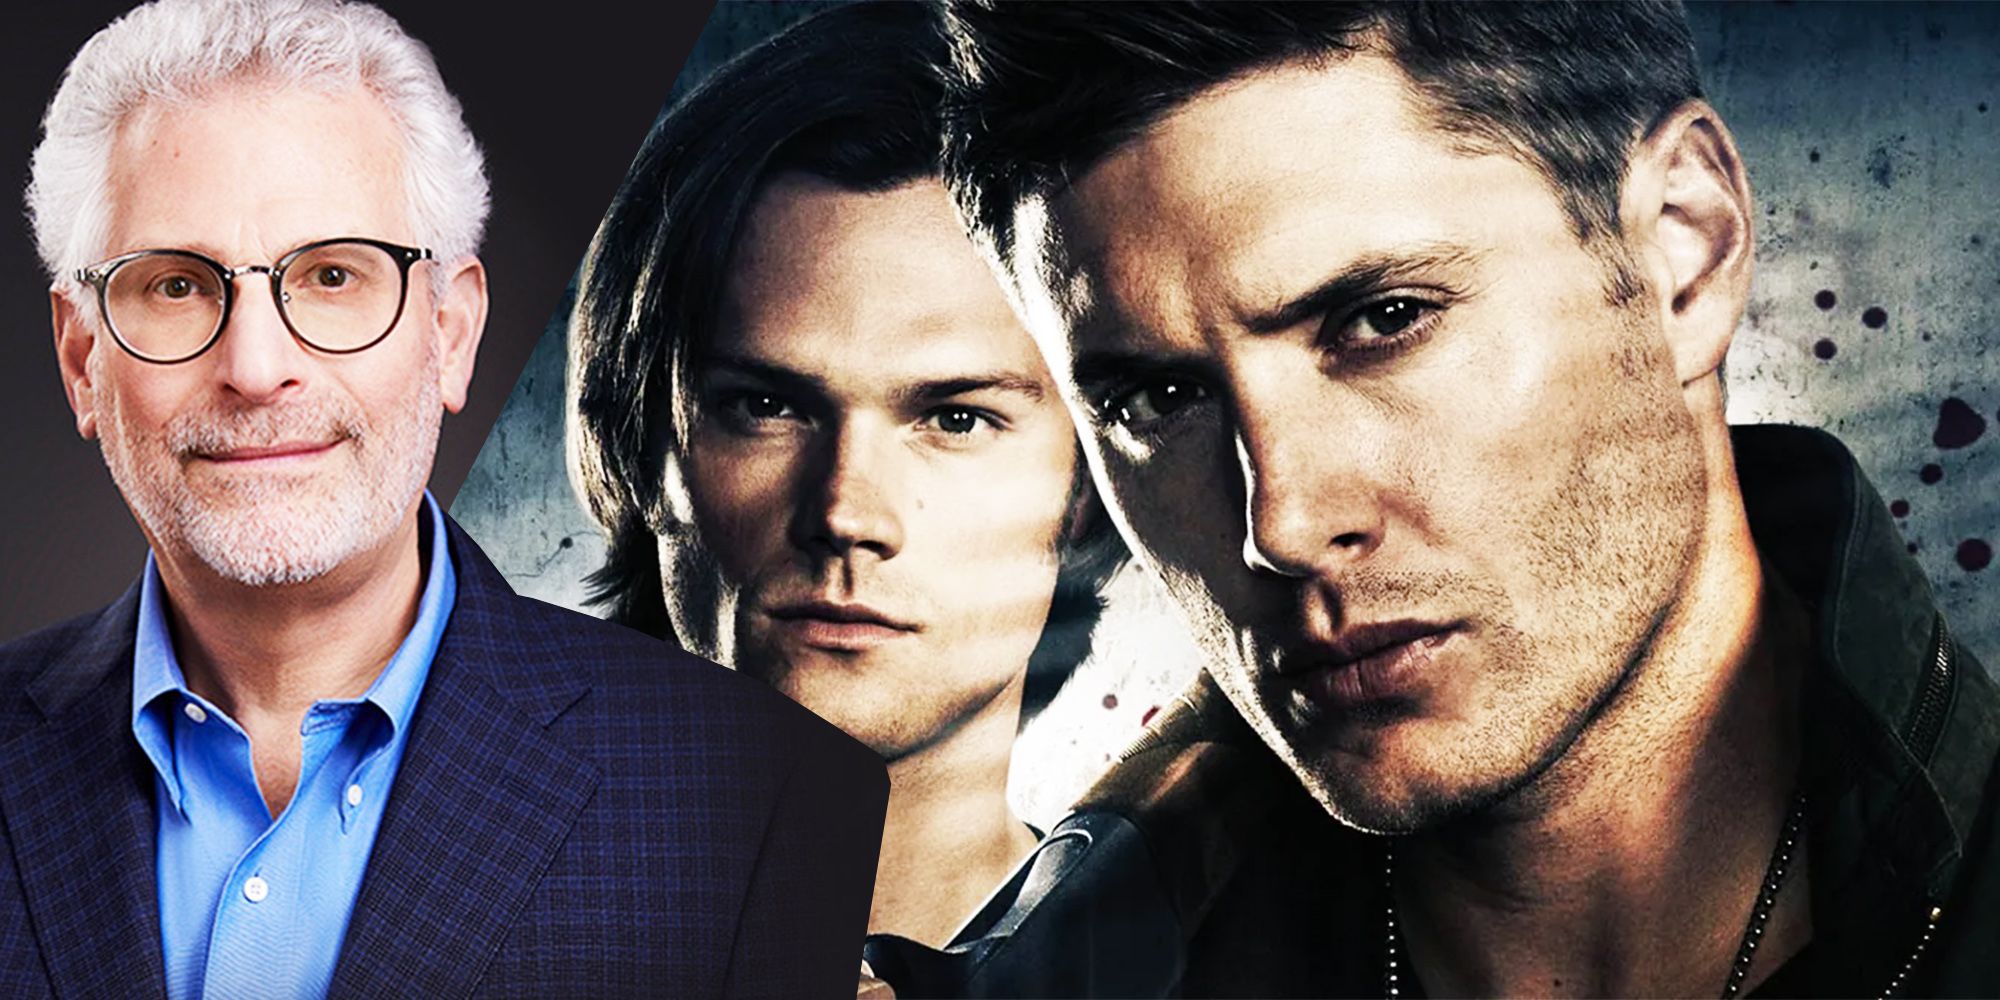 Former CW CEO with Supernatural's Winchester Brothers, Jared Padalecki and Jensen Ackles